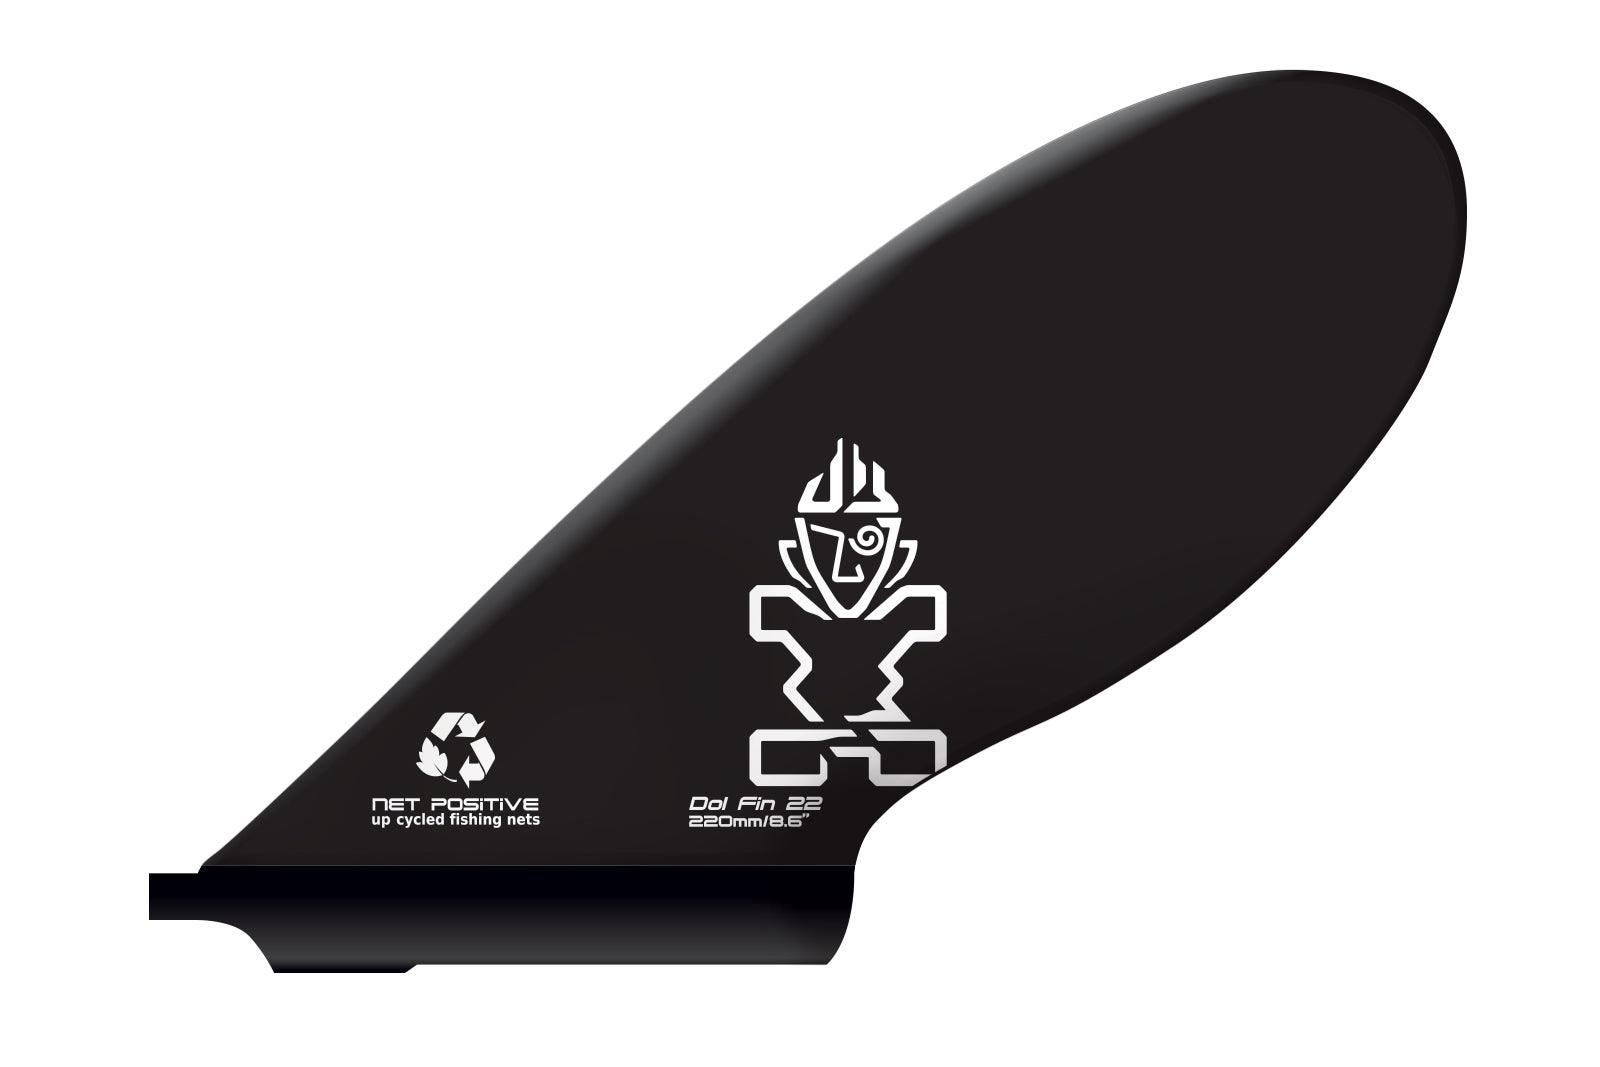 Starboard - Touring Gonflable Deluxe SC - {{ SUP Montreal }}